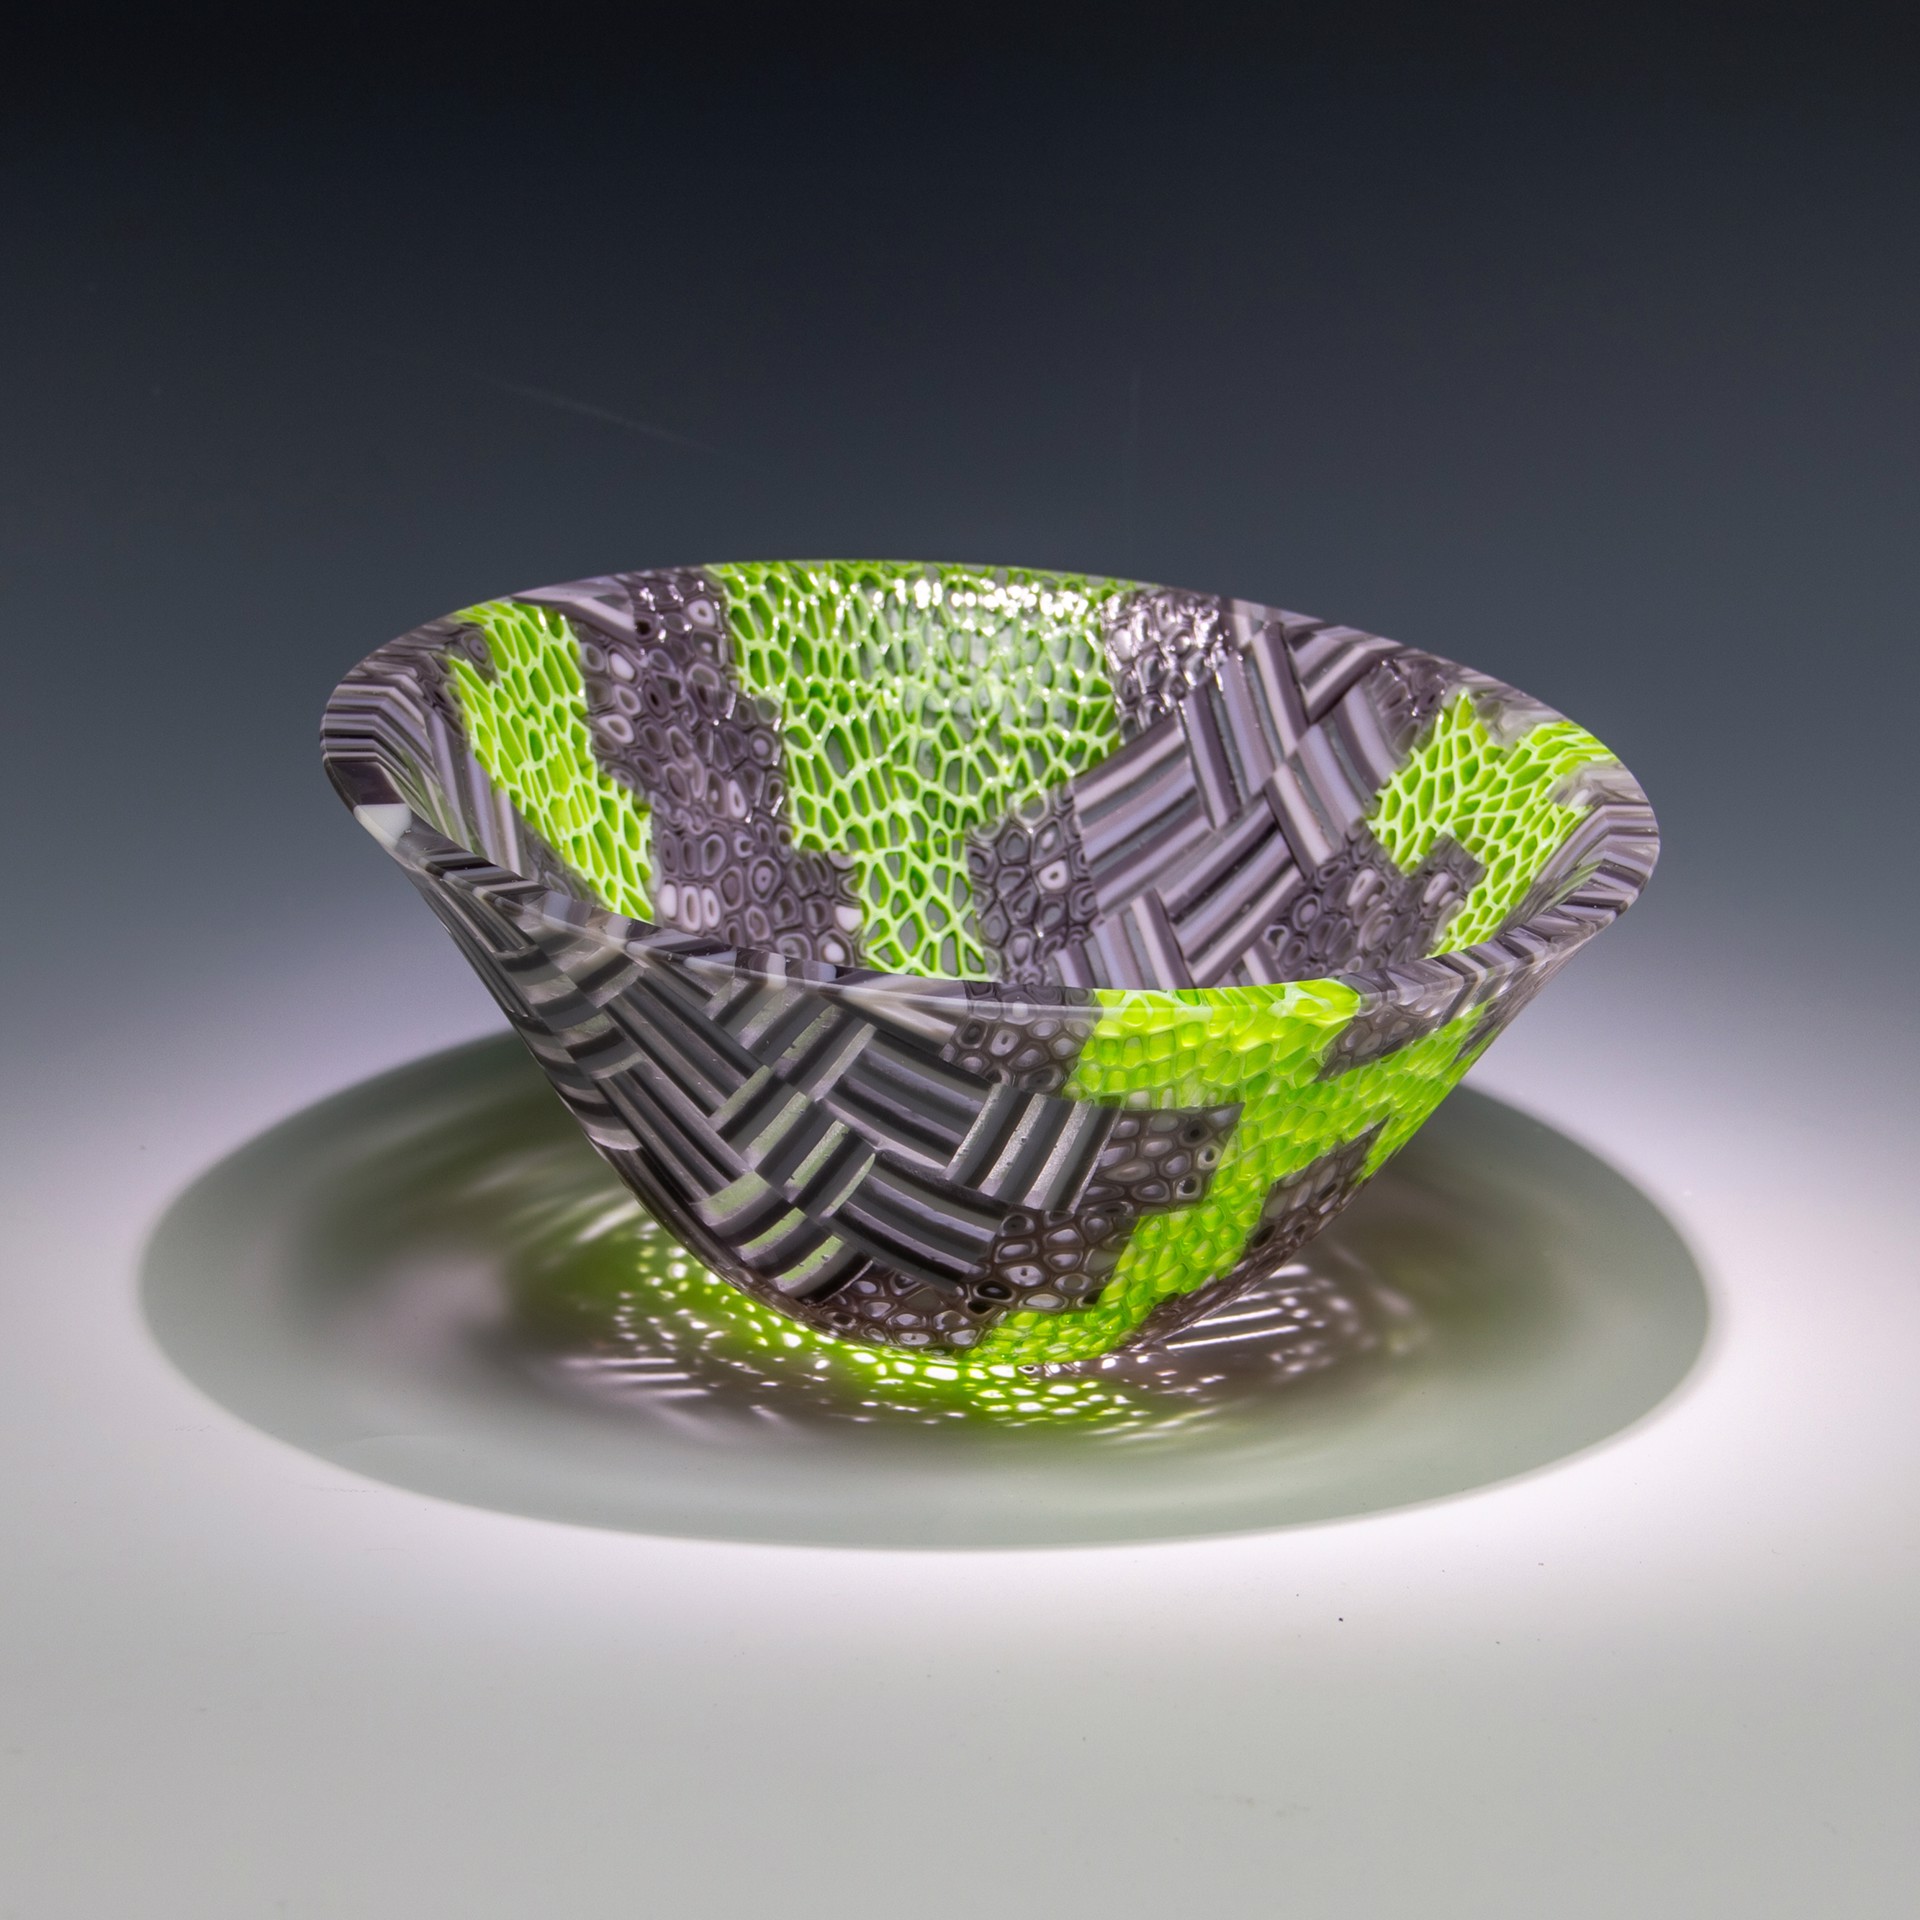 Monad Series: Gray/Bright Green Deep Vessel by Patti and Dave Hegland